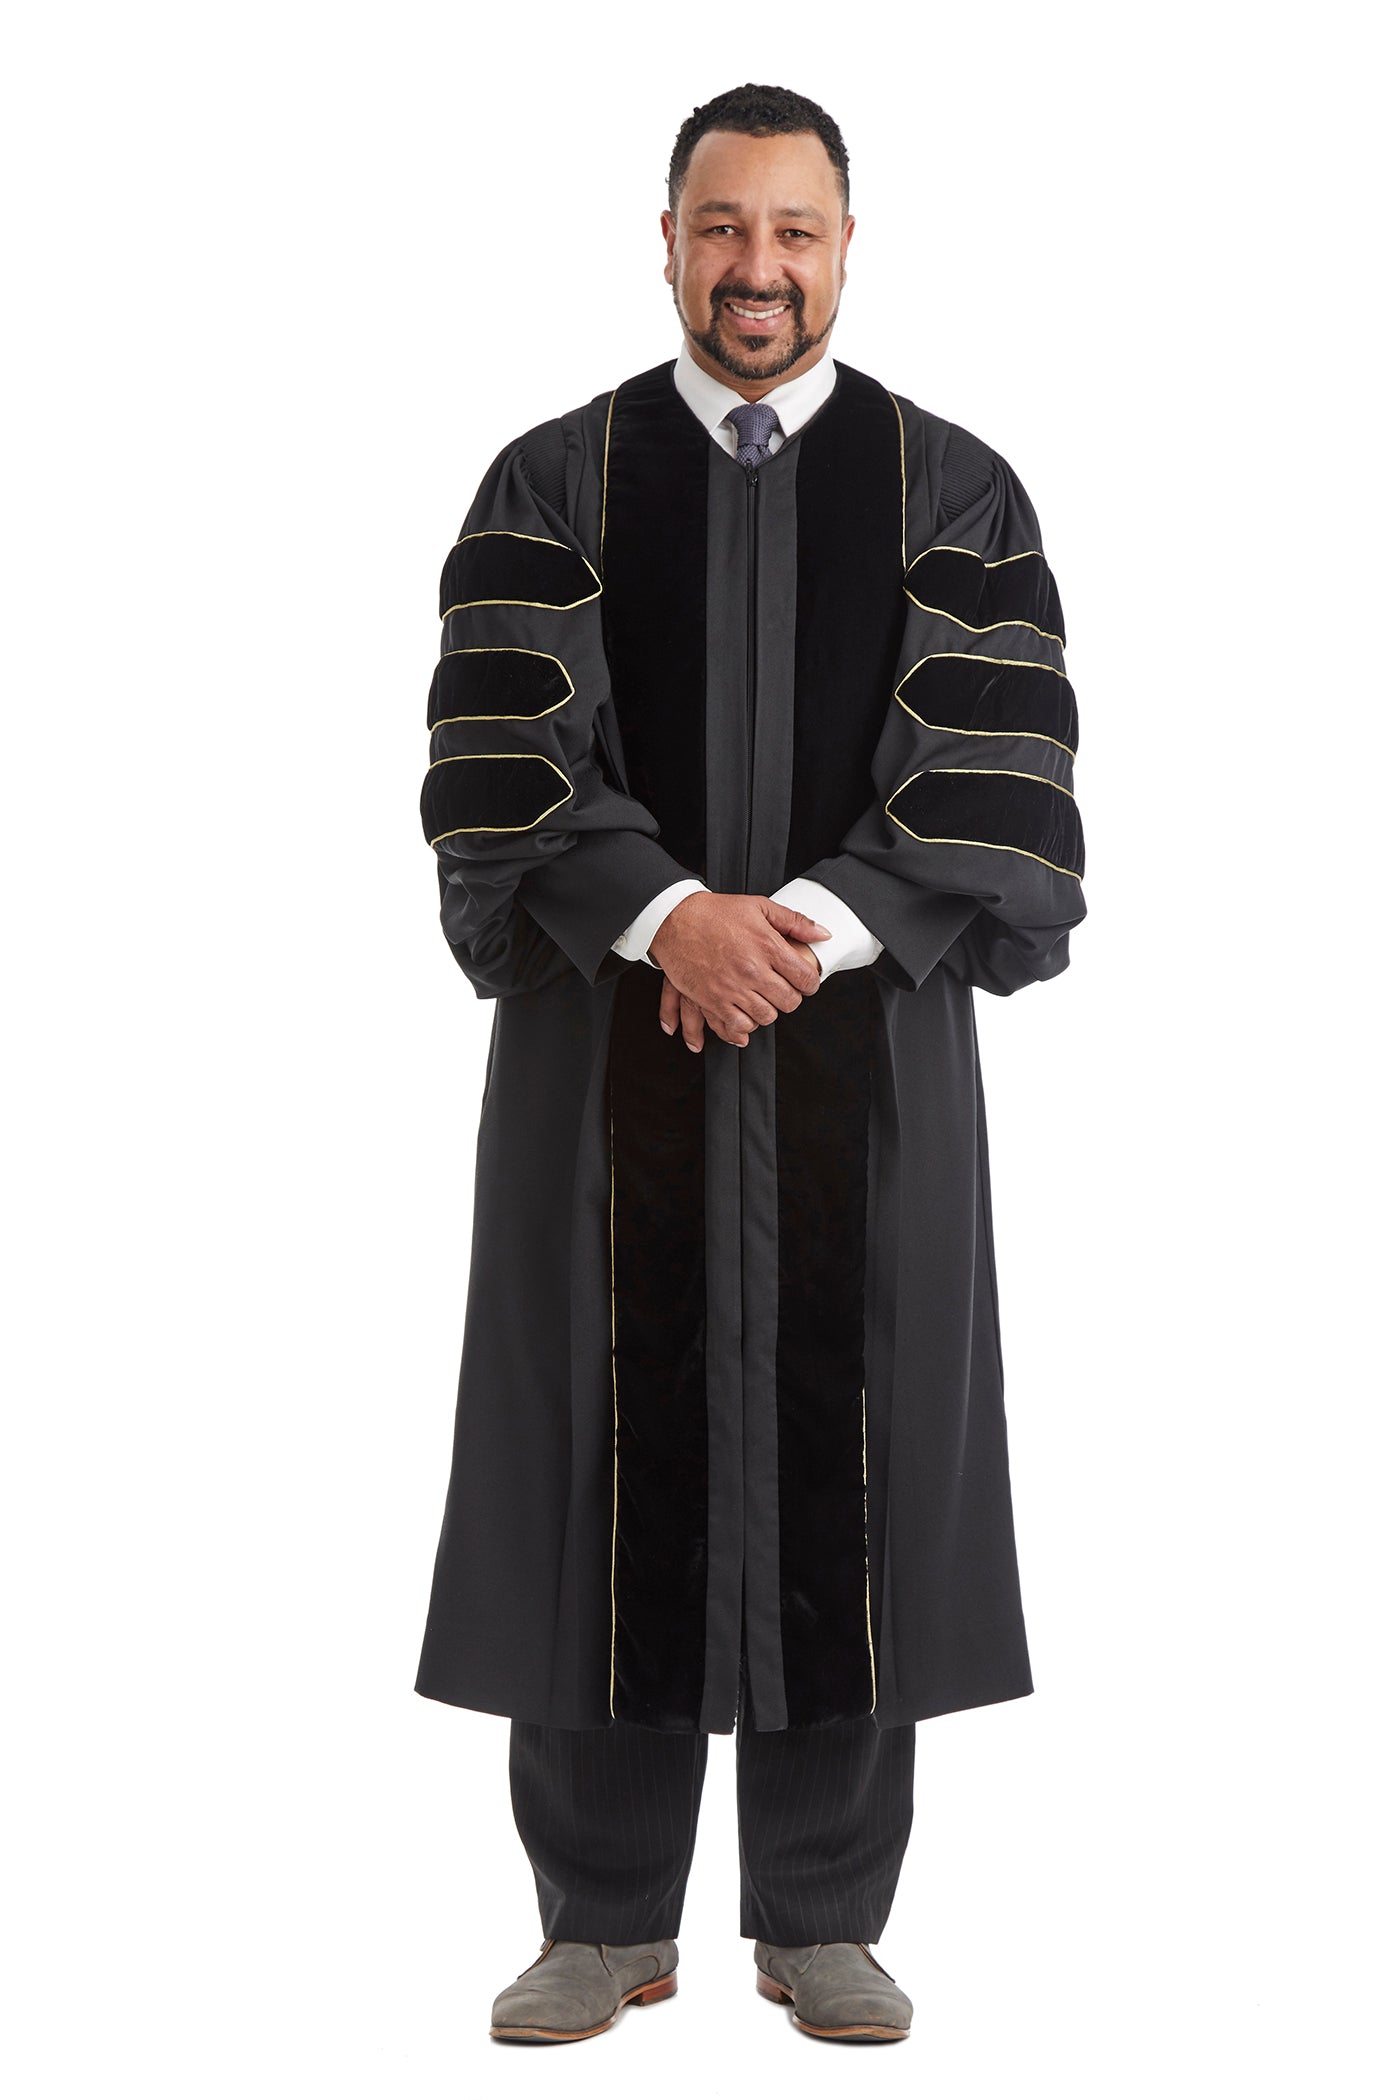 Doctoral Gown for US Military Academy at West Point